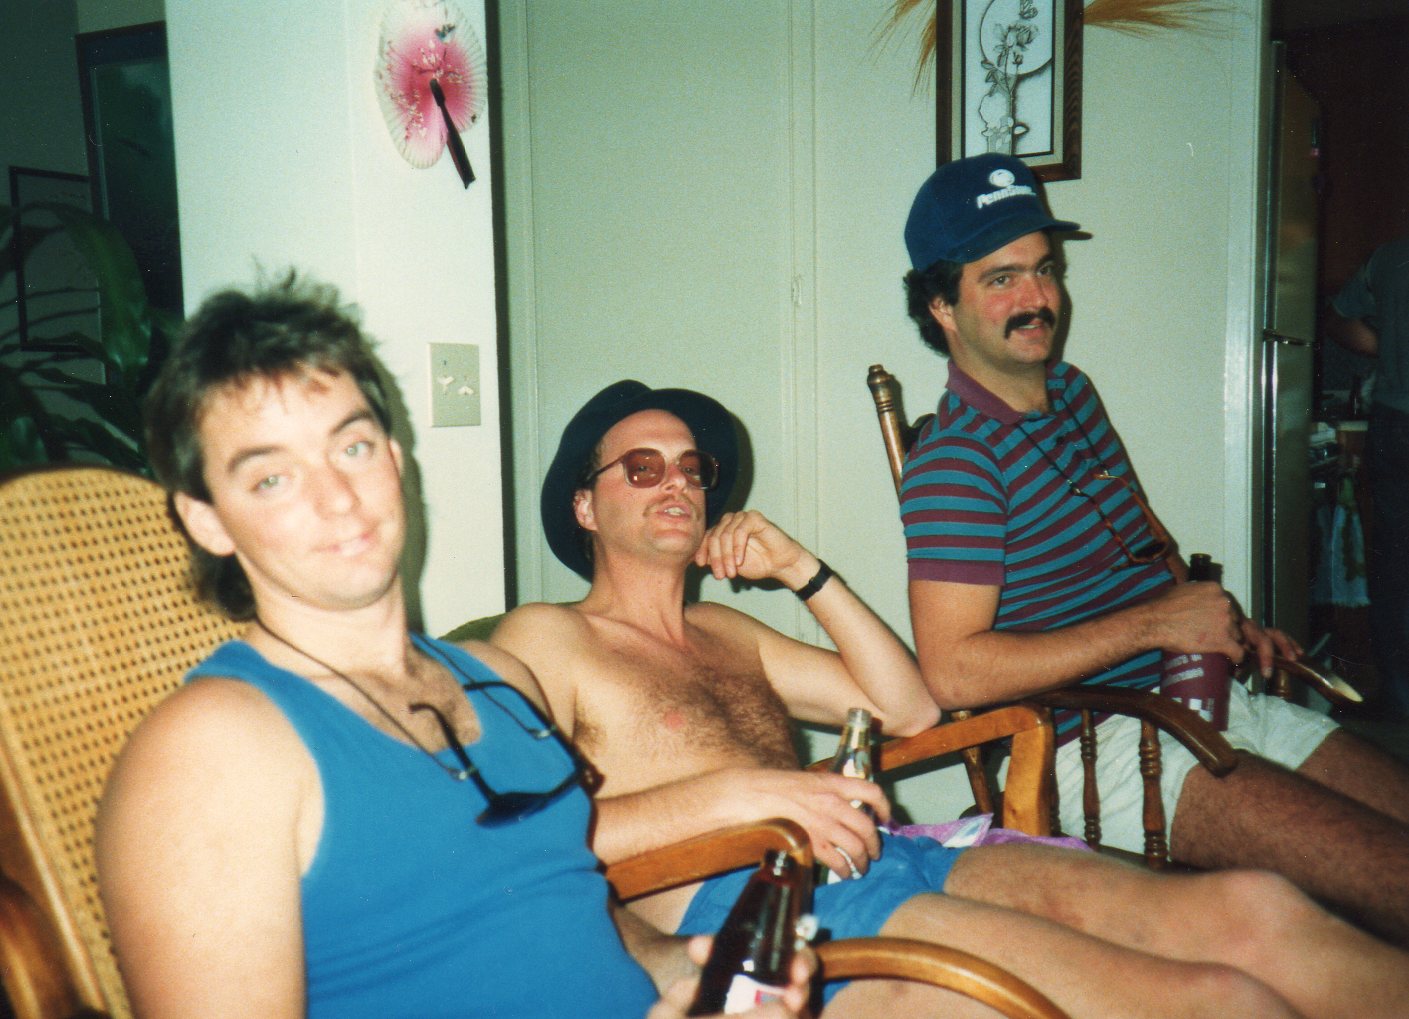 Party at Adler's house ~1986
Me and the Burkett brothers
